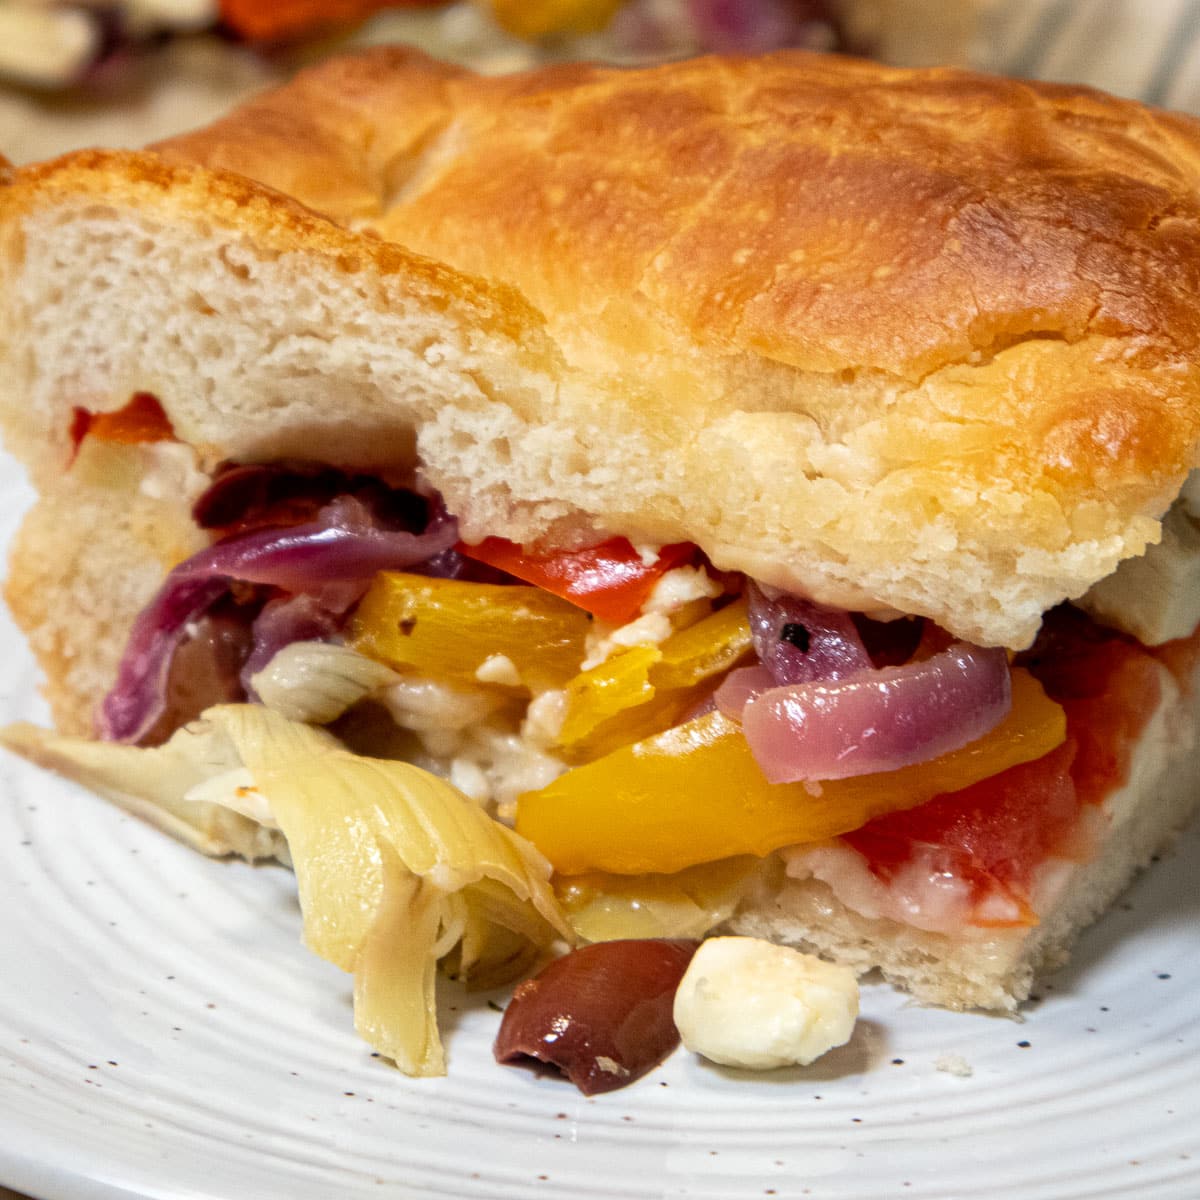 A slice of Stuffed Focaccia over flowing with vegetables.